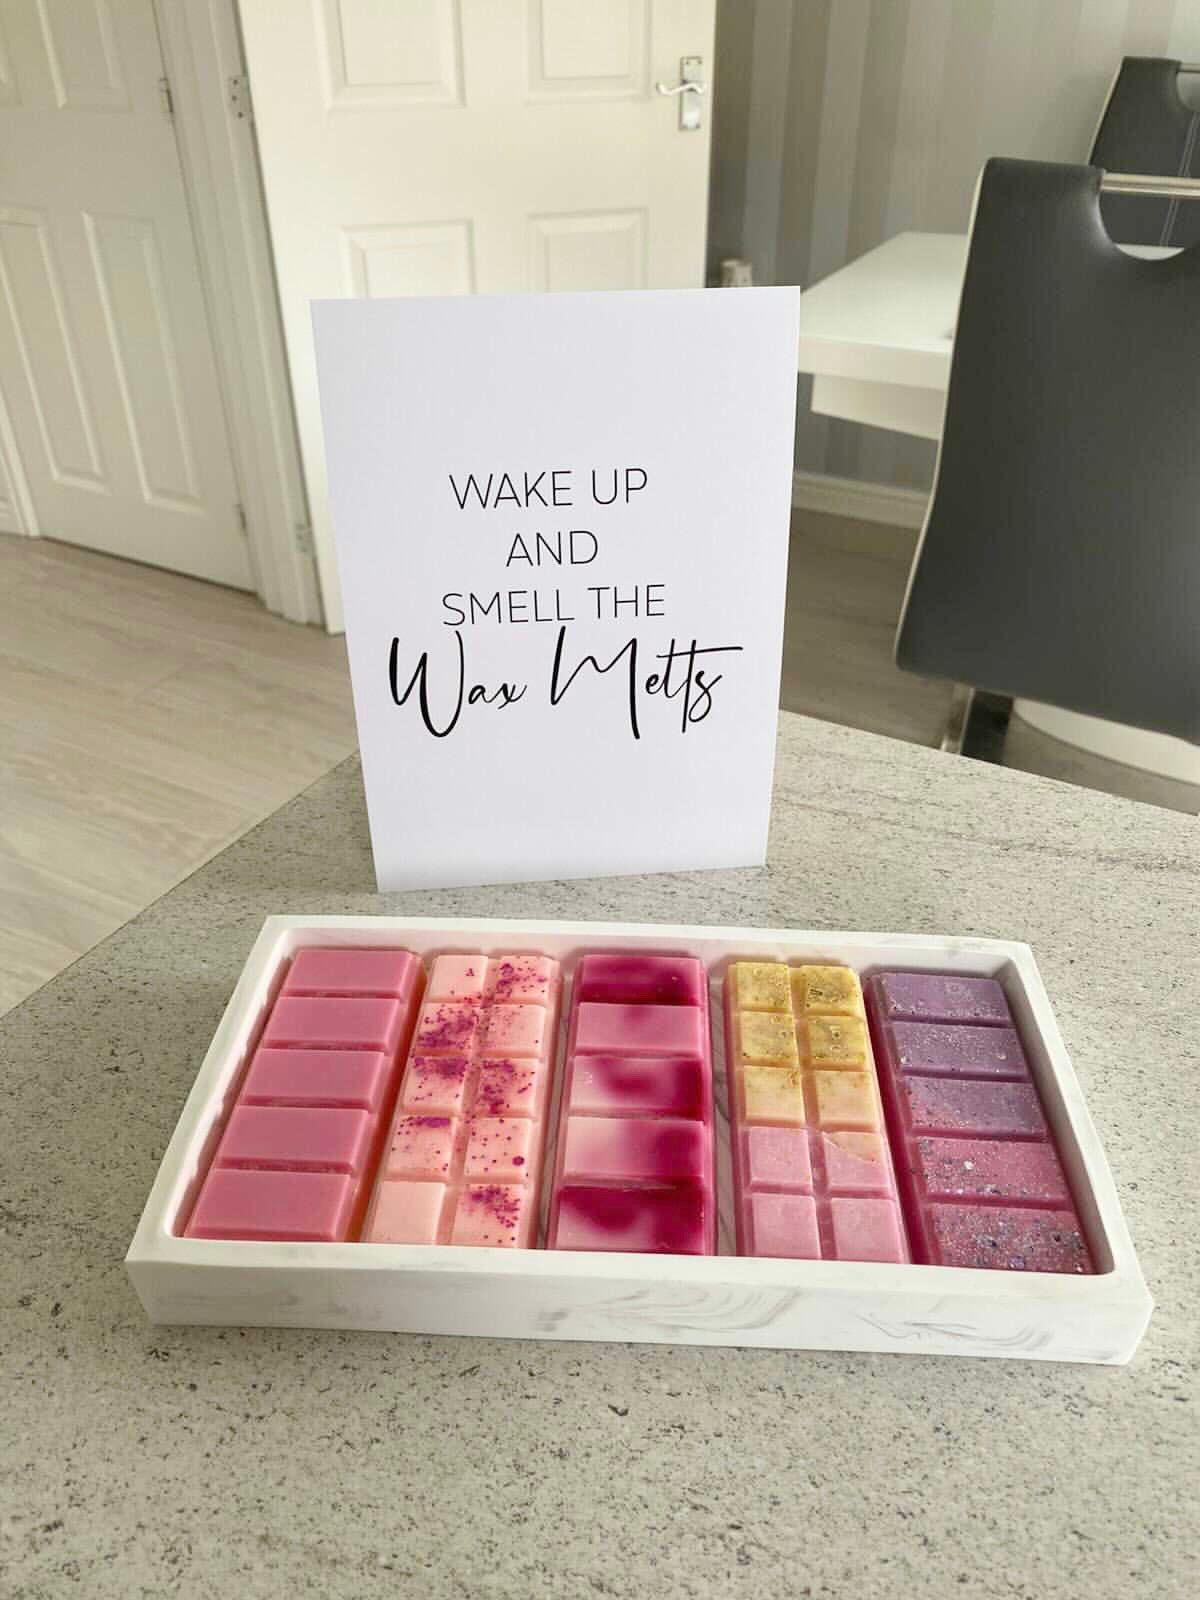  Wake Up And Smell The Wax Melts Simple Wall Humorous Home Decor Print by WinsterCreations™ Official Store WinsterCreations™ Official Store Perfumarie